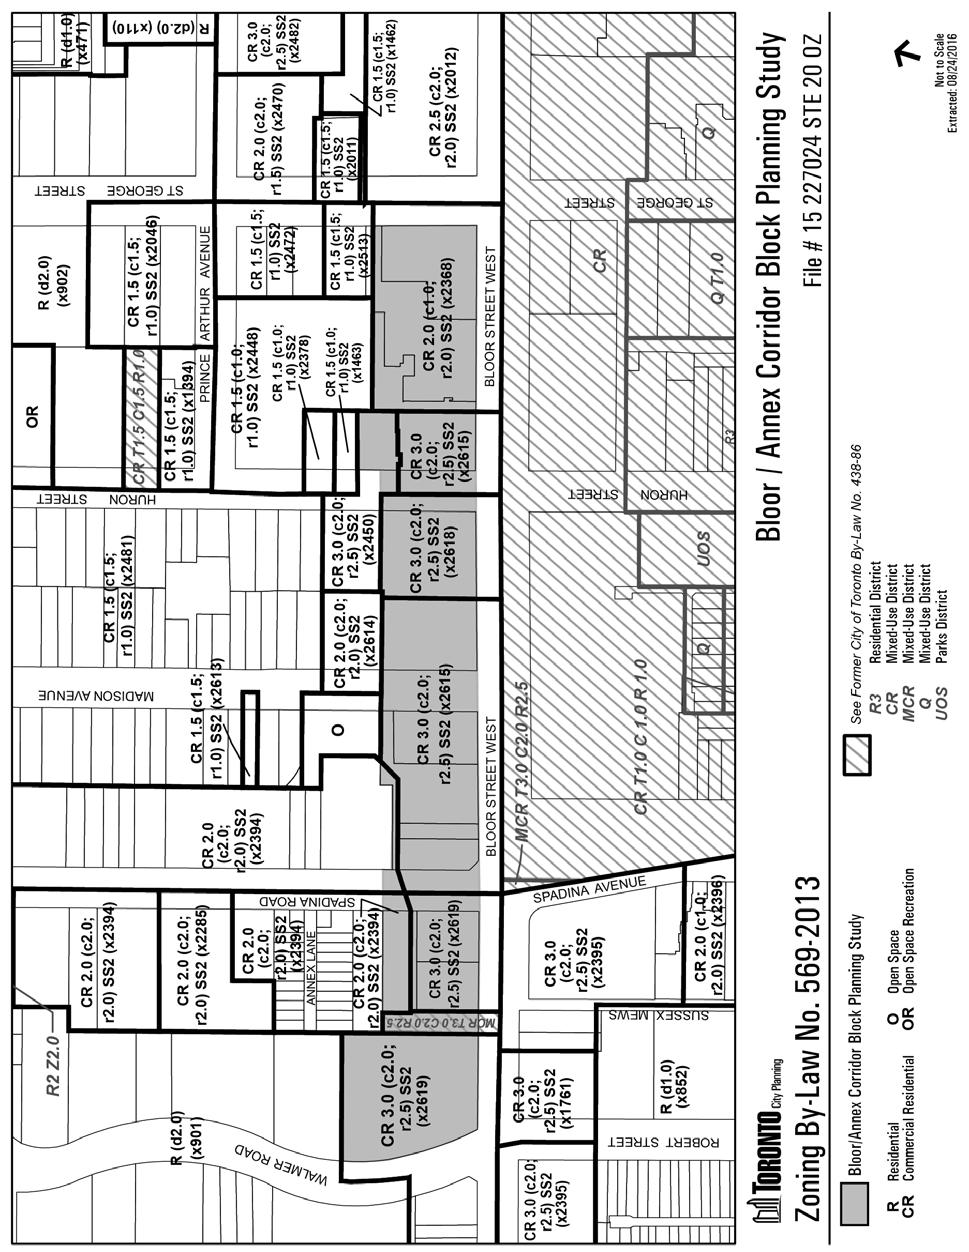 Attachment 5: Zoning Map 569-2013 Staff report for action